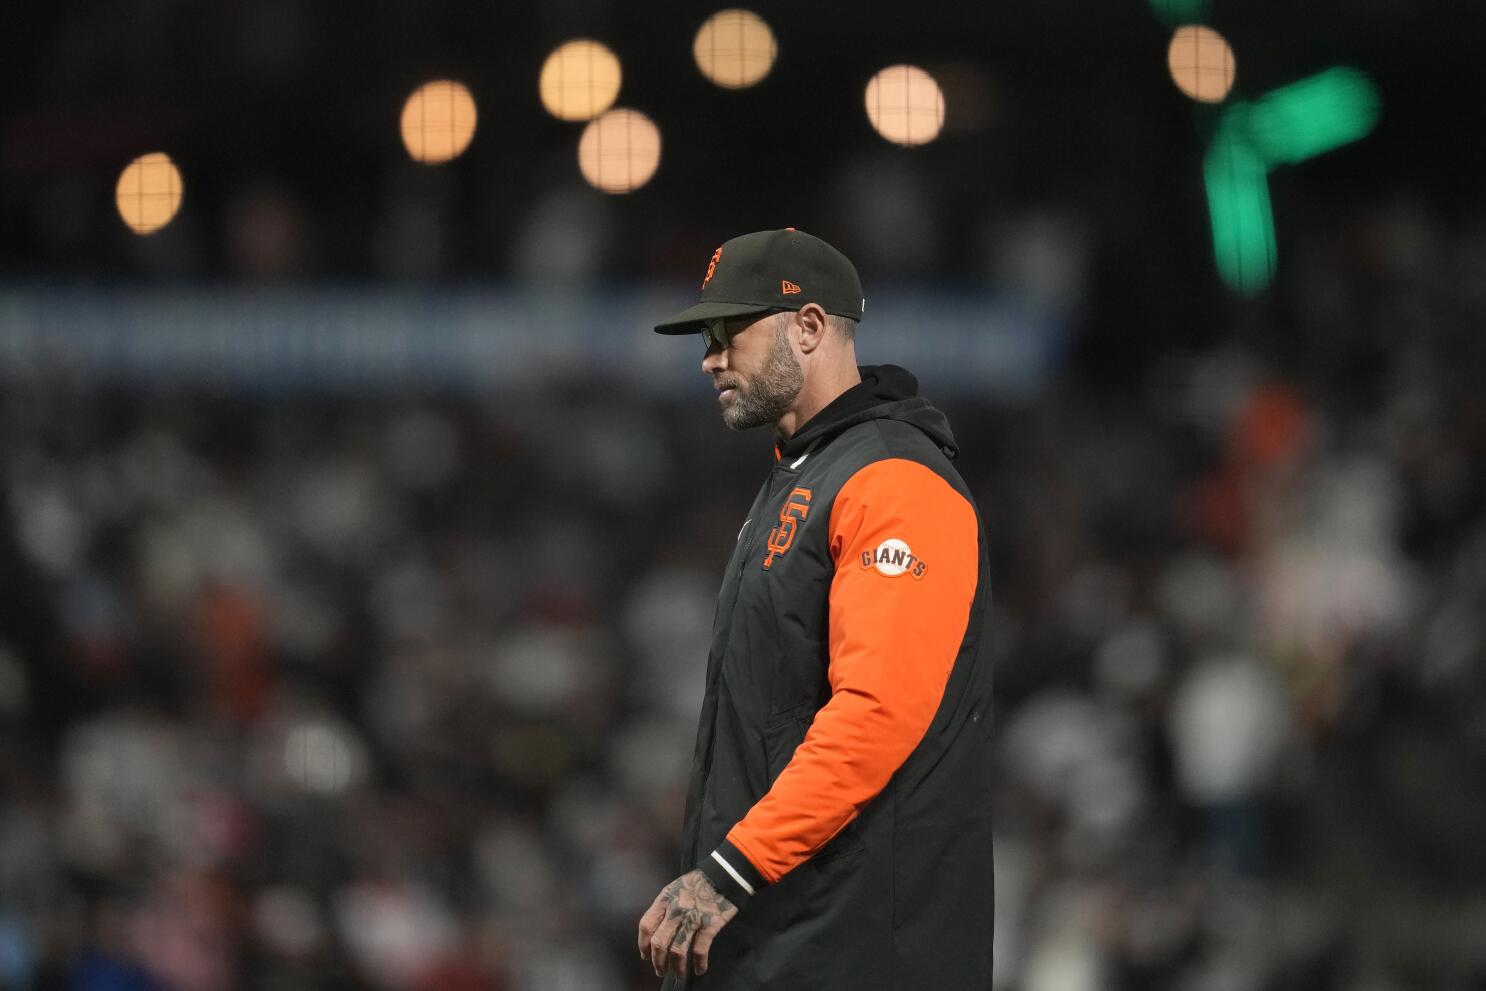 Bruce Bochy returns to Oracle Park to warm welcome guiding Texas Rangers -  The San Diego Union-Tribune